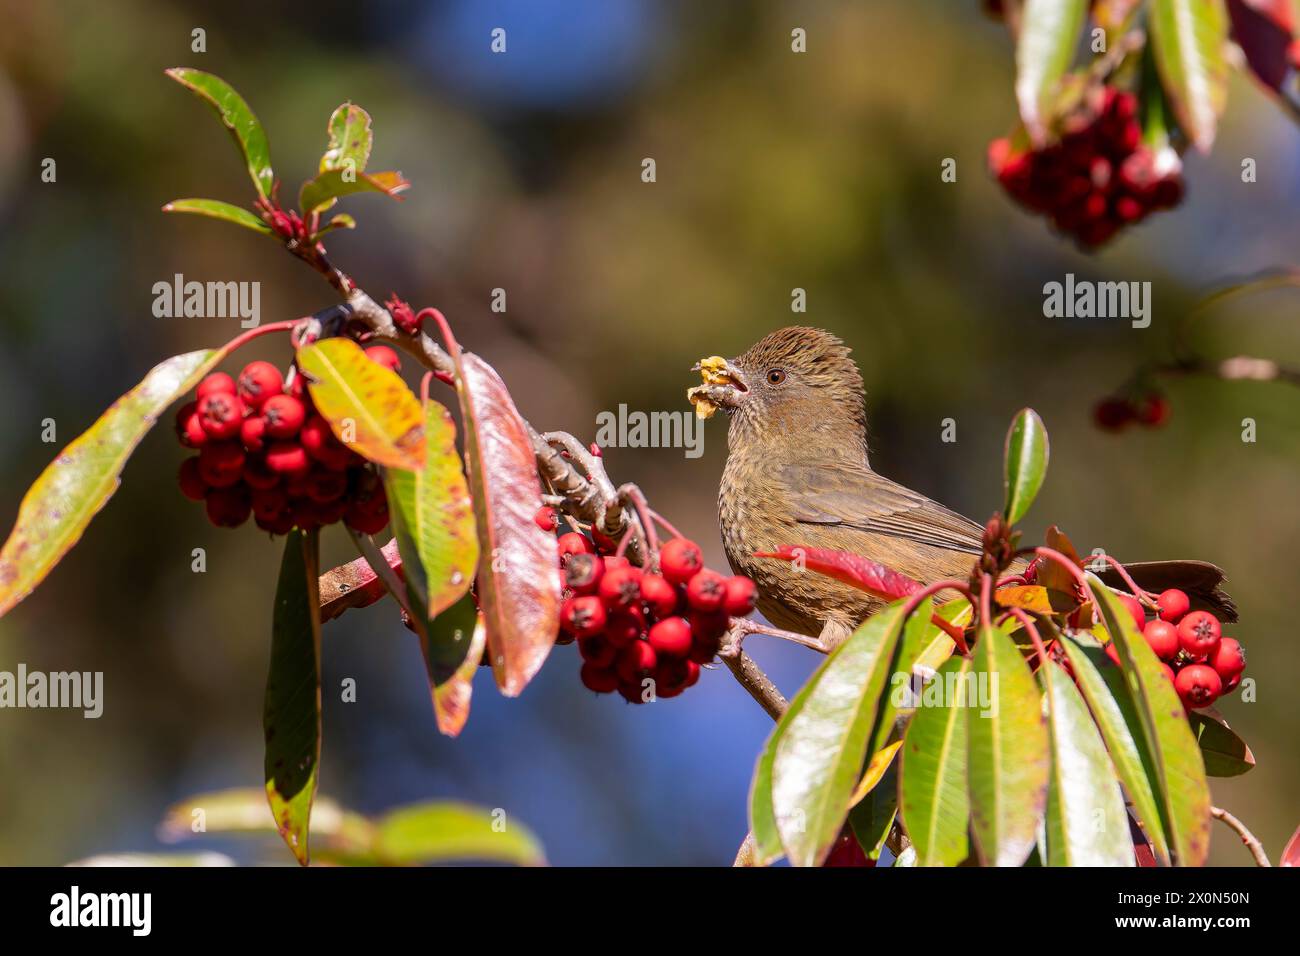 Taiwan rosefinch female, an endemic bird of Taiwan perched on a tree eating red fruits Stock Photo